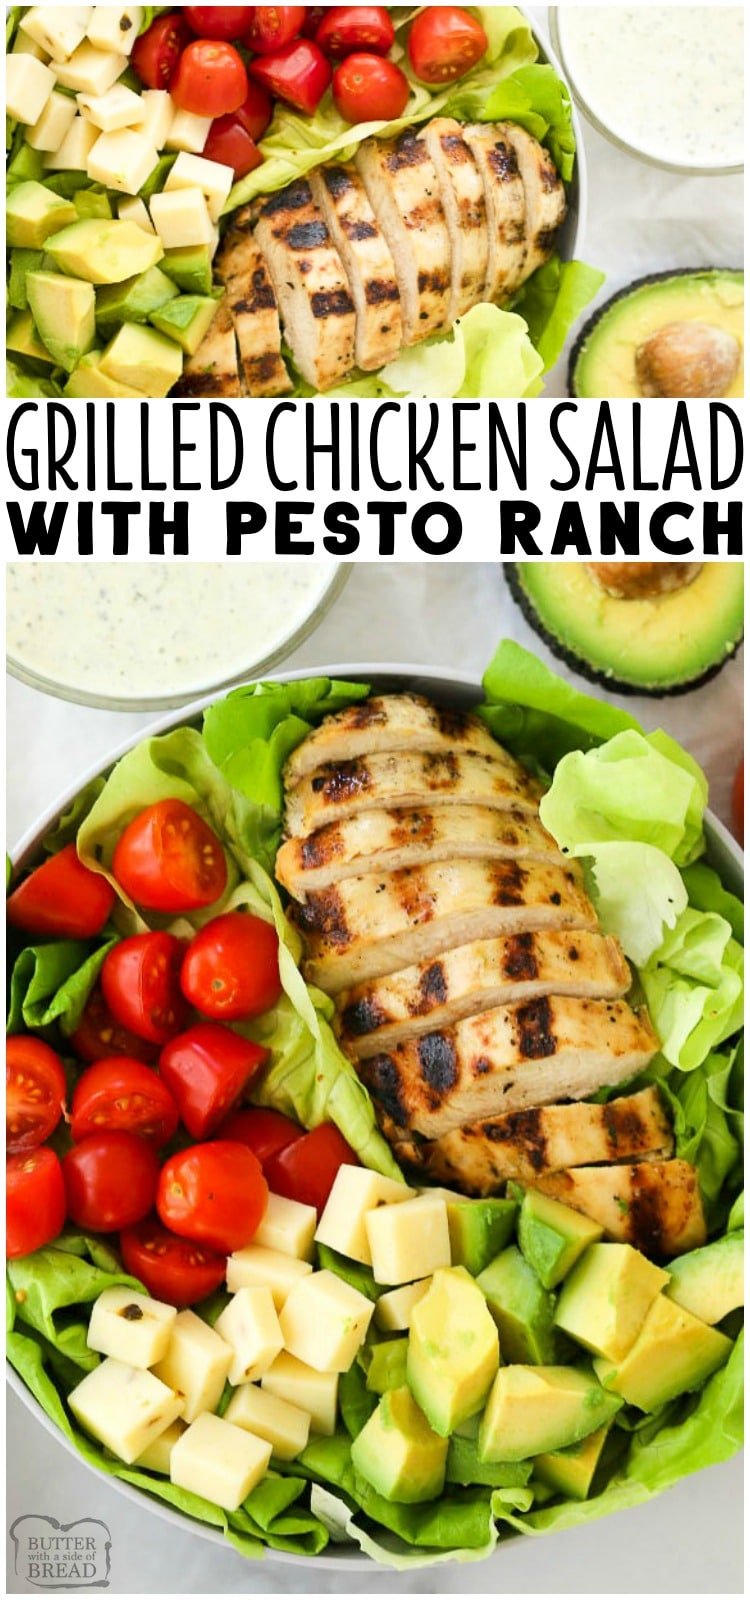 We love this  Grilled Chicken Salad Recipe with Pesto Ranch Dressing.  It is so easy and comes together so quickly. It's such a great grilled chicken salad recipe.  It includes a simple grilled chicken marinade recipe that makes the most tender and juicy grilled chicken and a delicious pesto ranch dressing everyone will love. #grilledchicken #healthysaladrecipes #pesto #ranch #recipefrom Butter With a Side of Bread